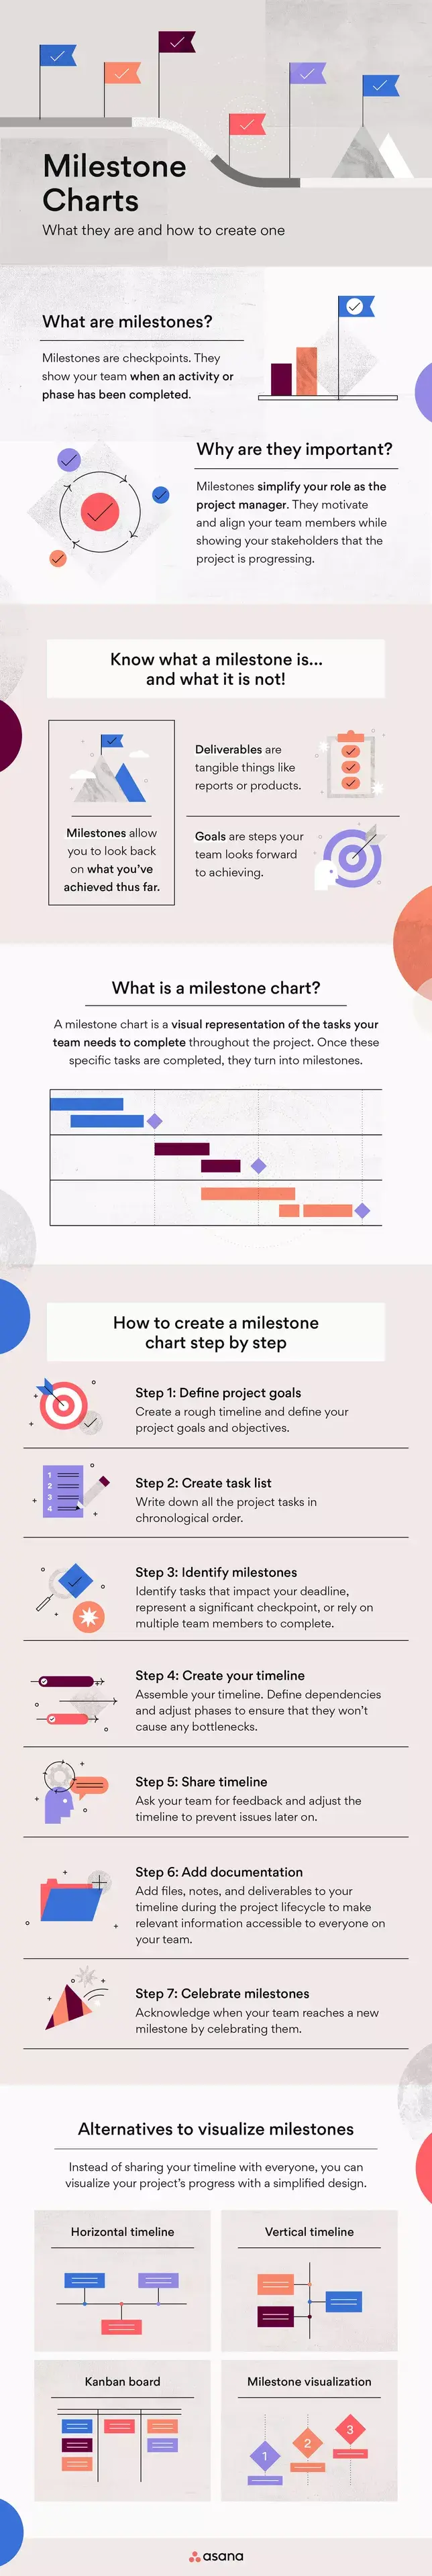 [inline illustration] what are milestone charts (infographic)